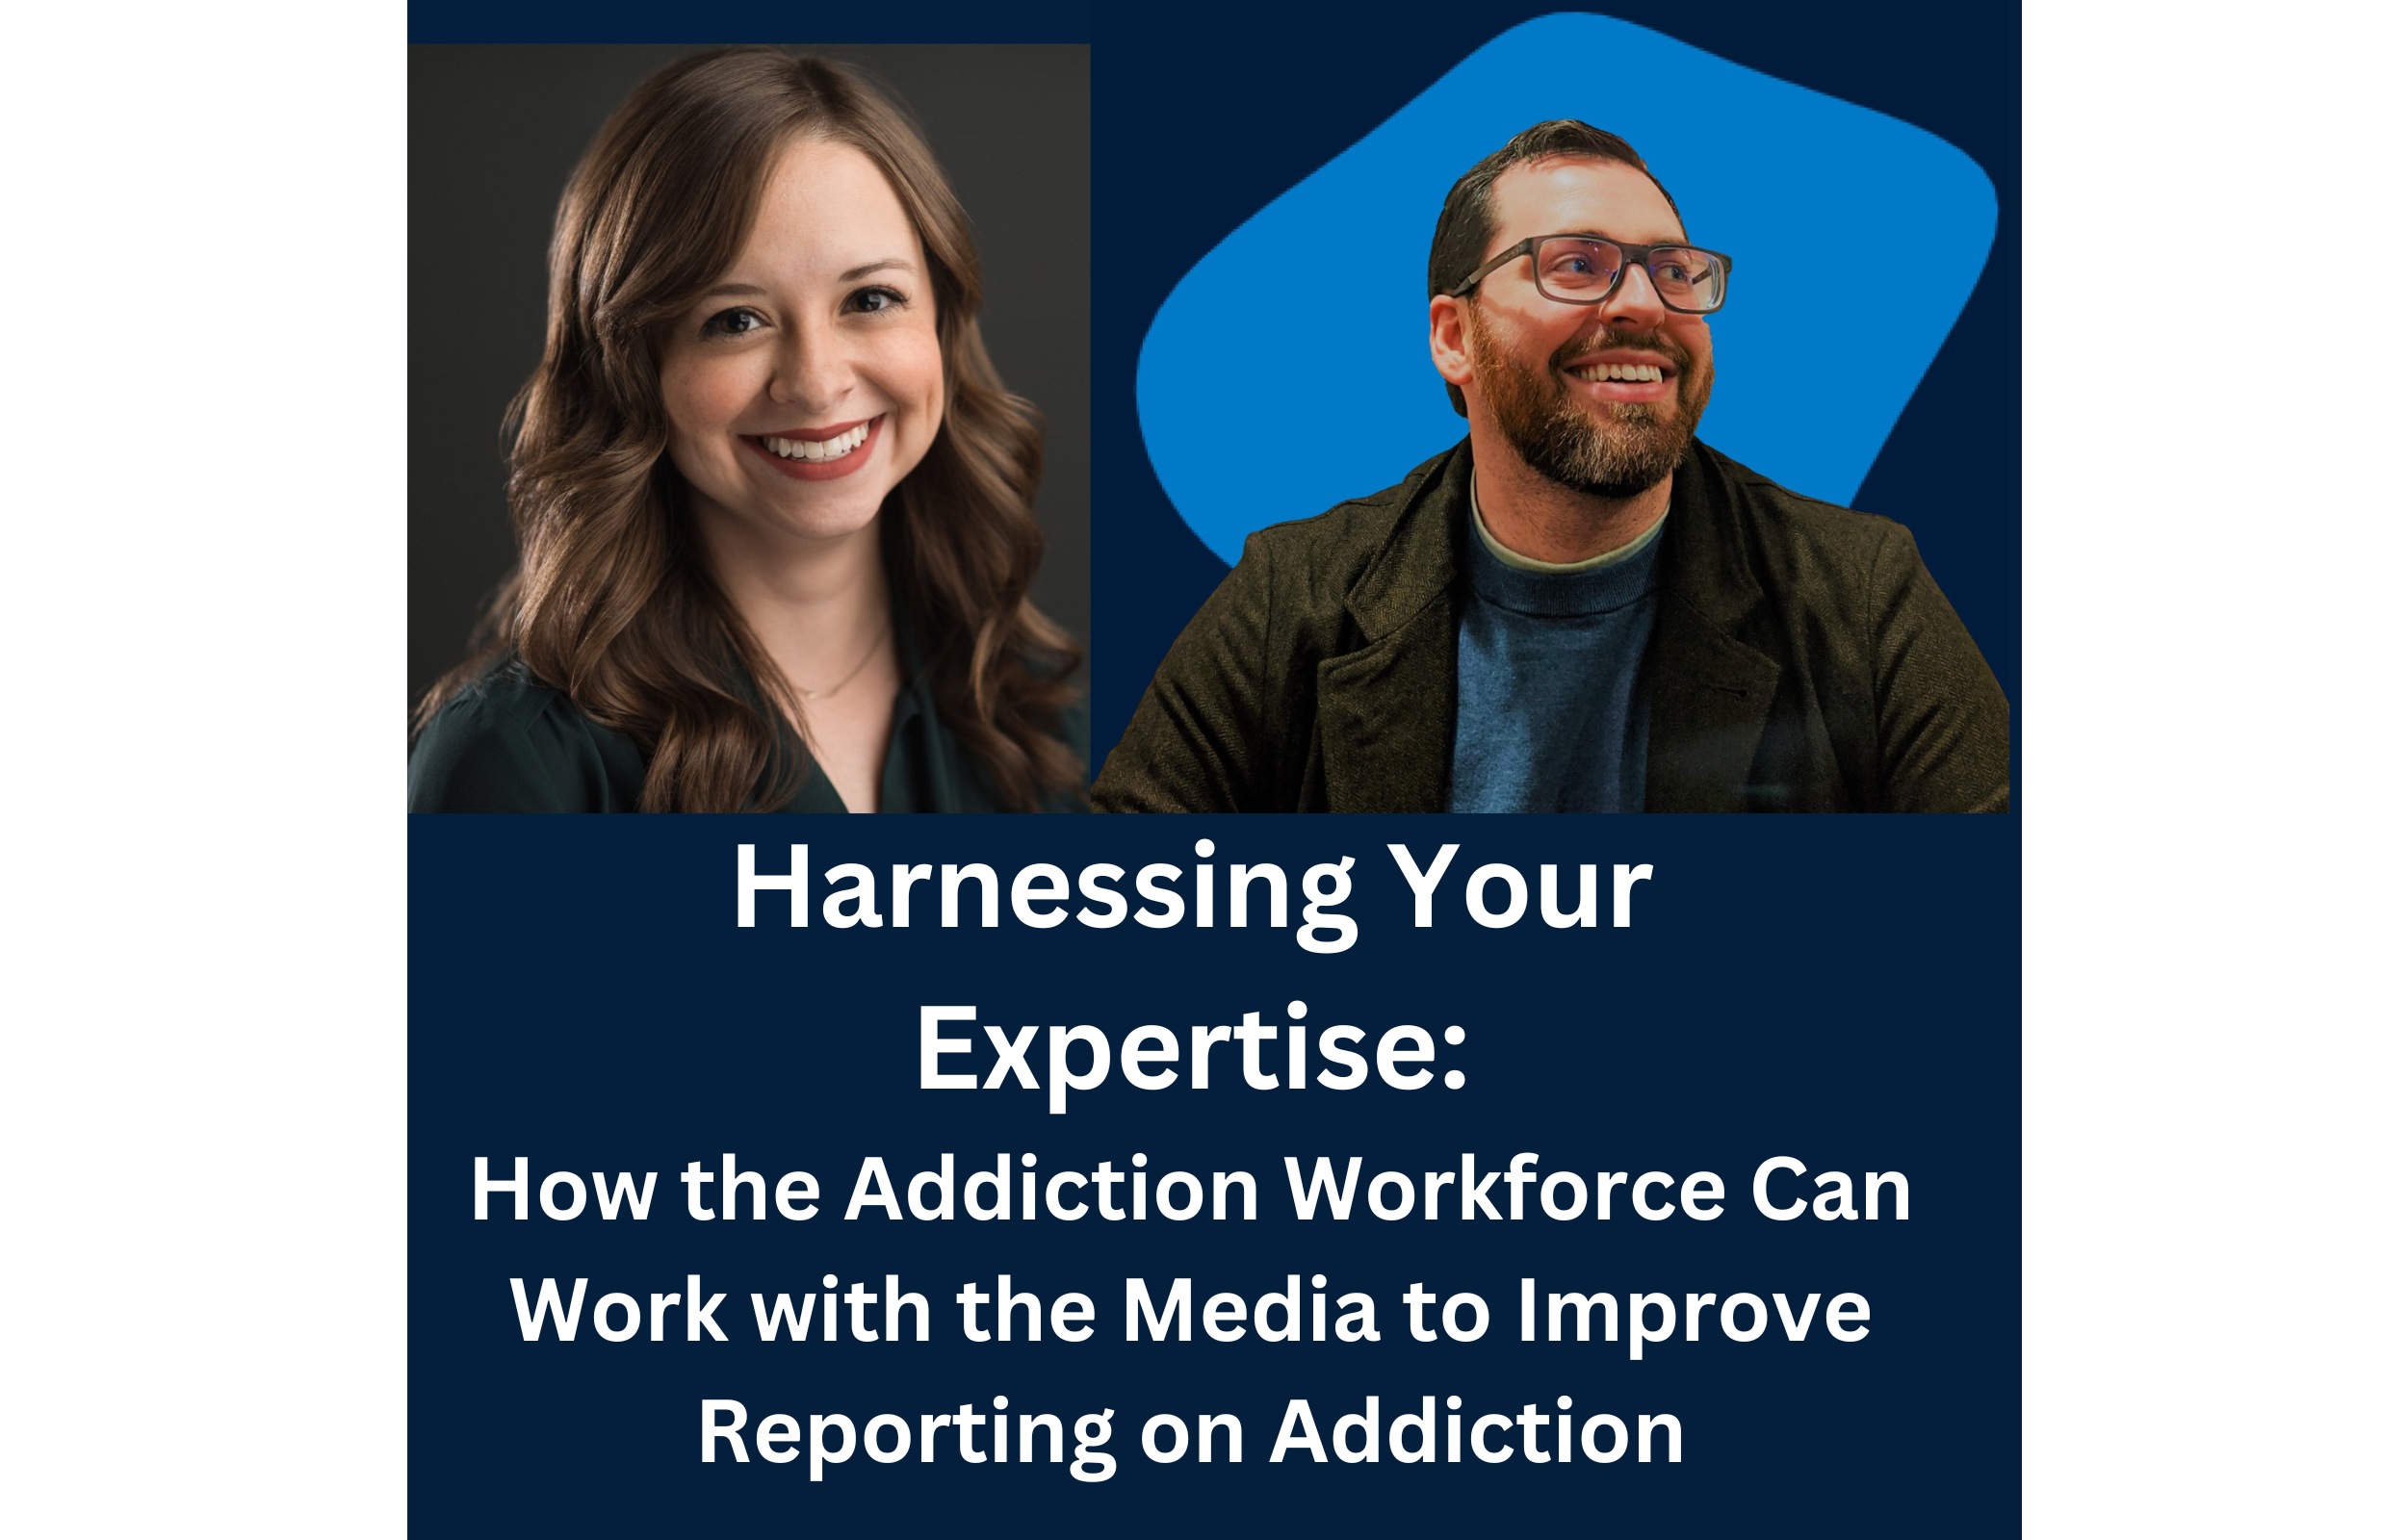 Harnessing your expertise: How the addiction workforce can work with the media to improve reporting on addiction